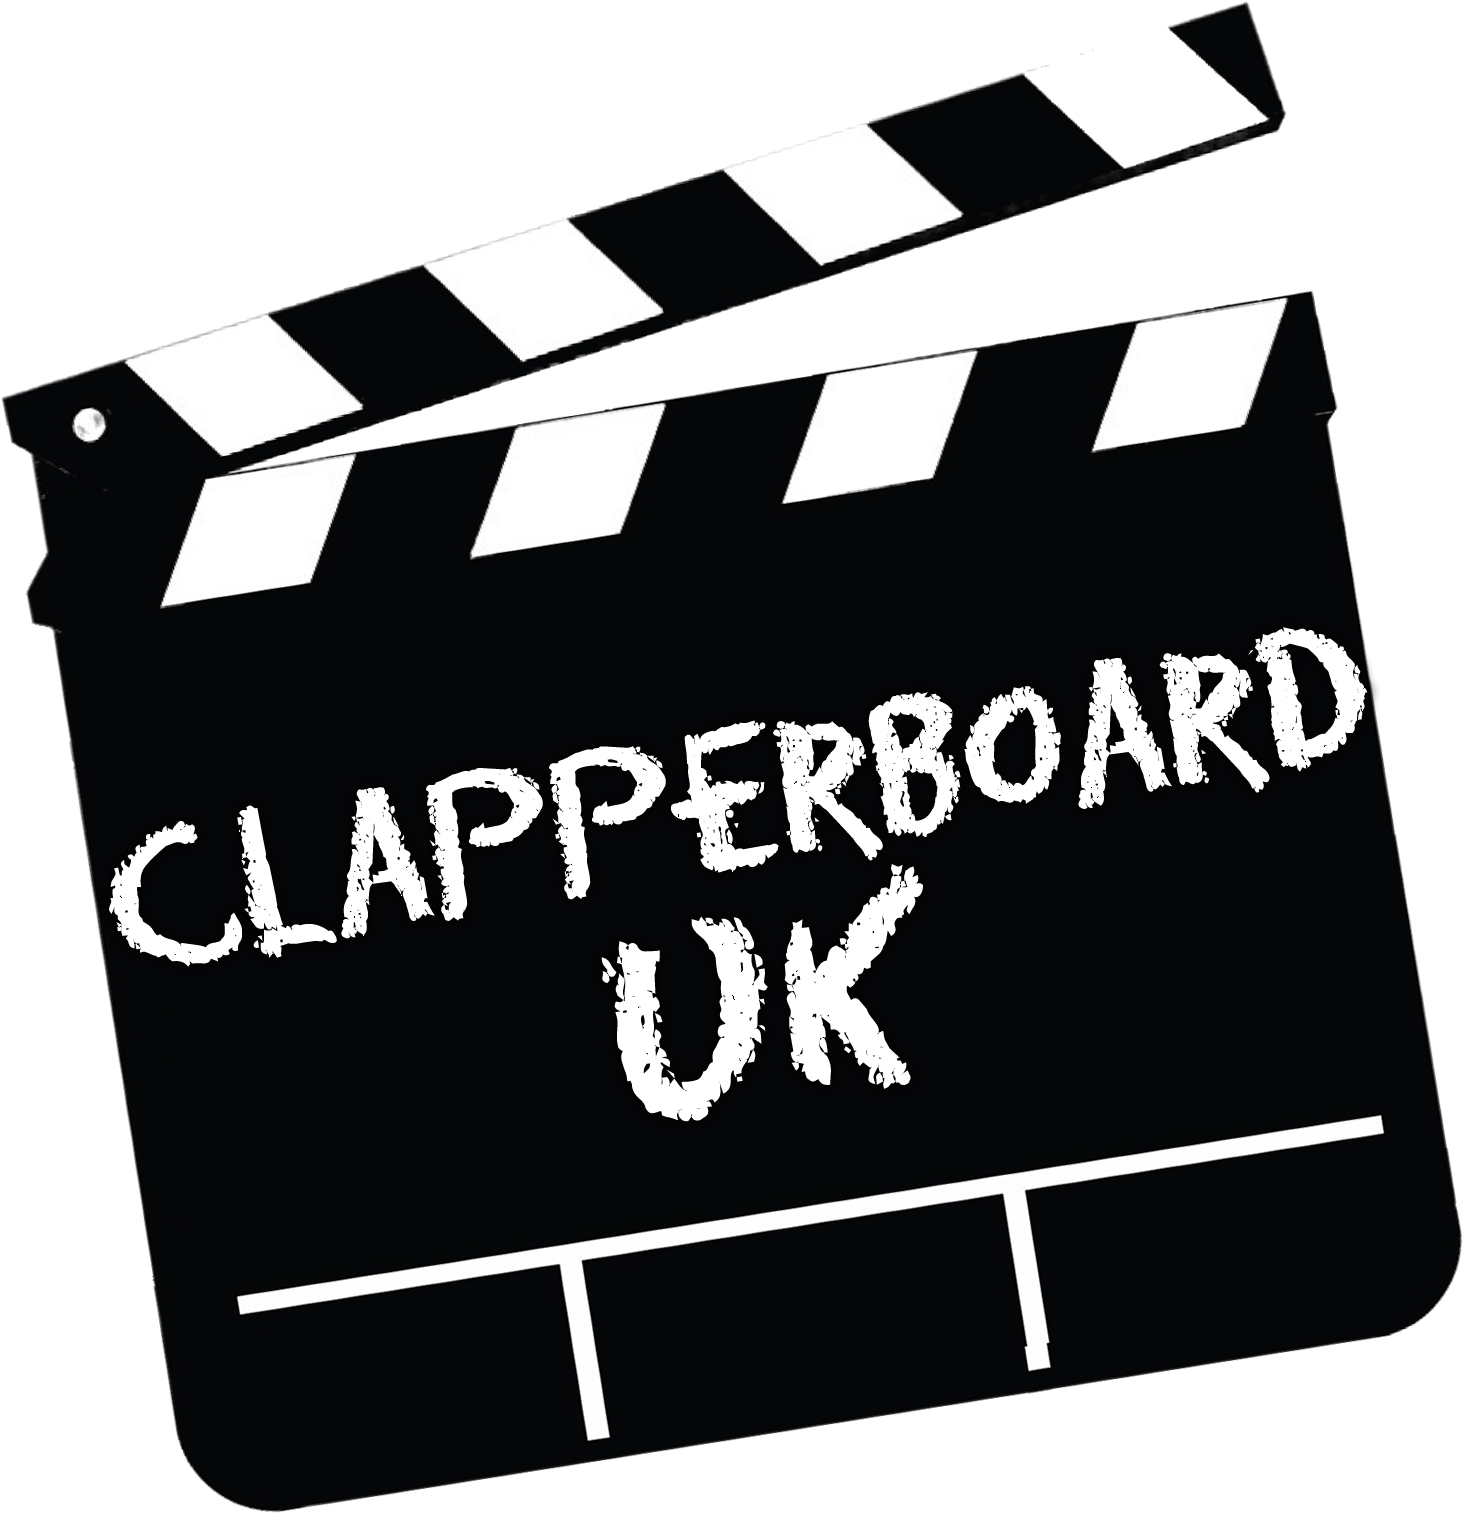 Movie Clappers - ClipArt Best